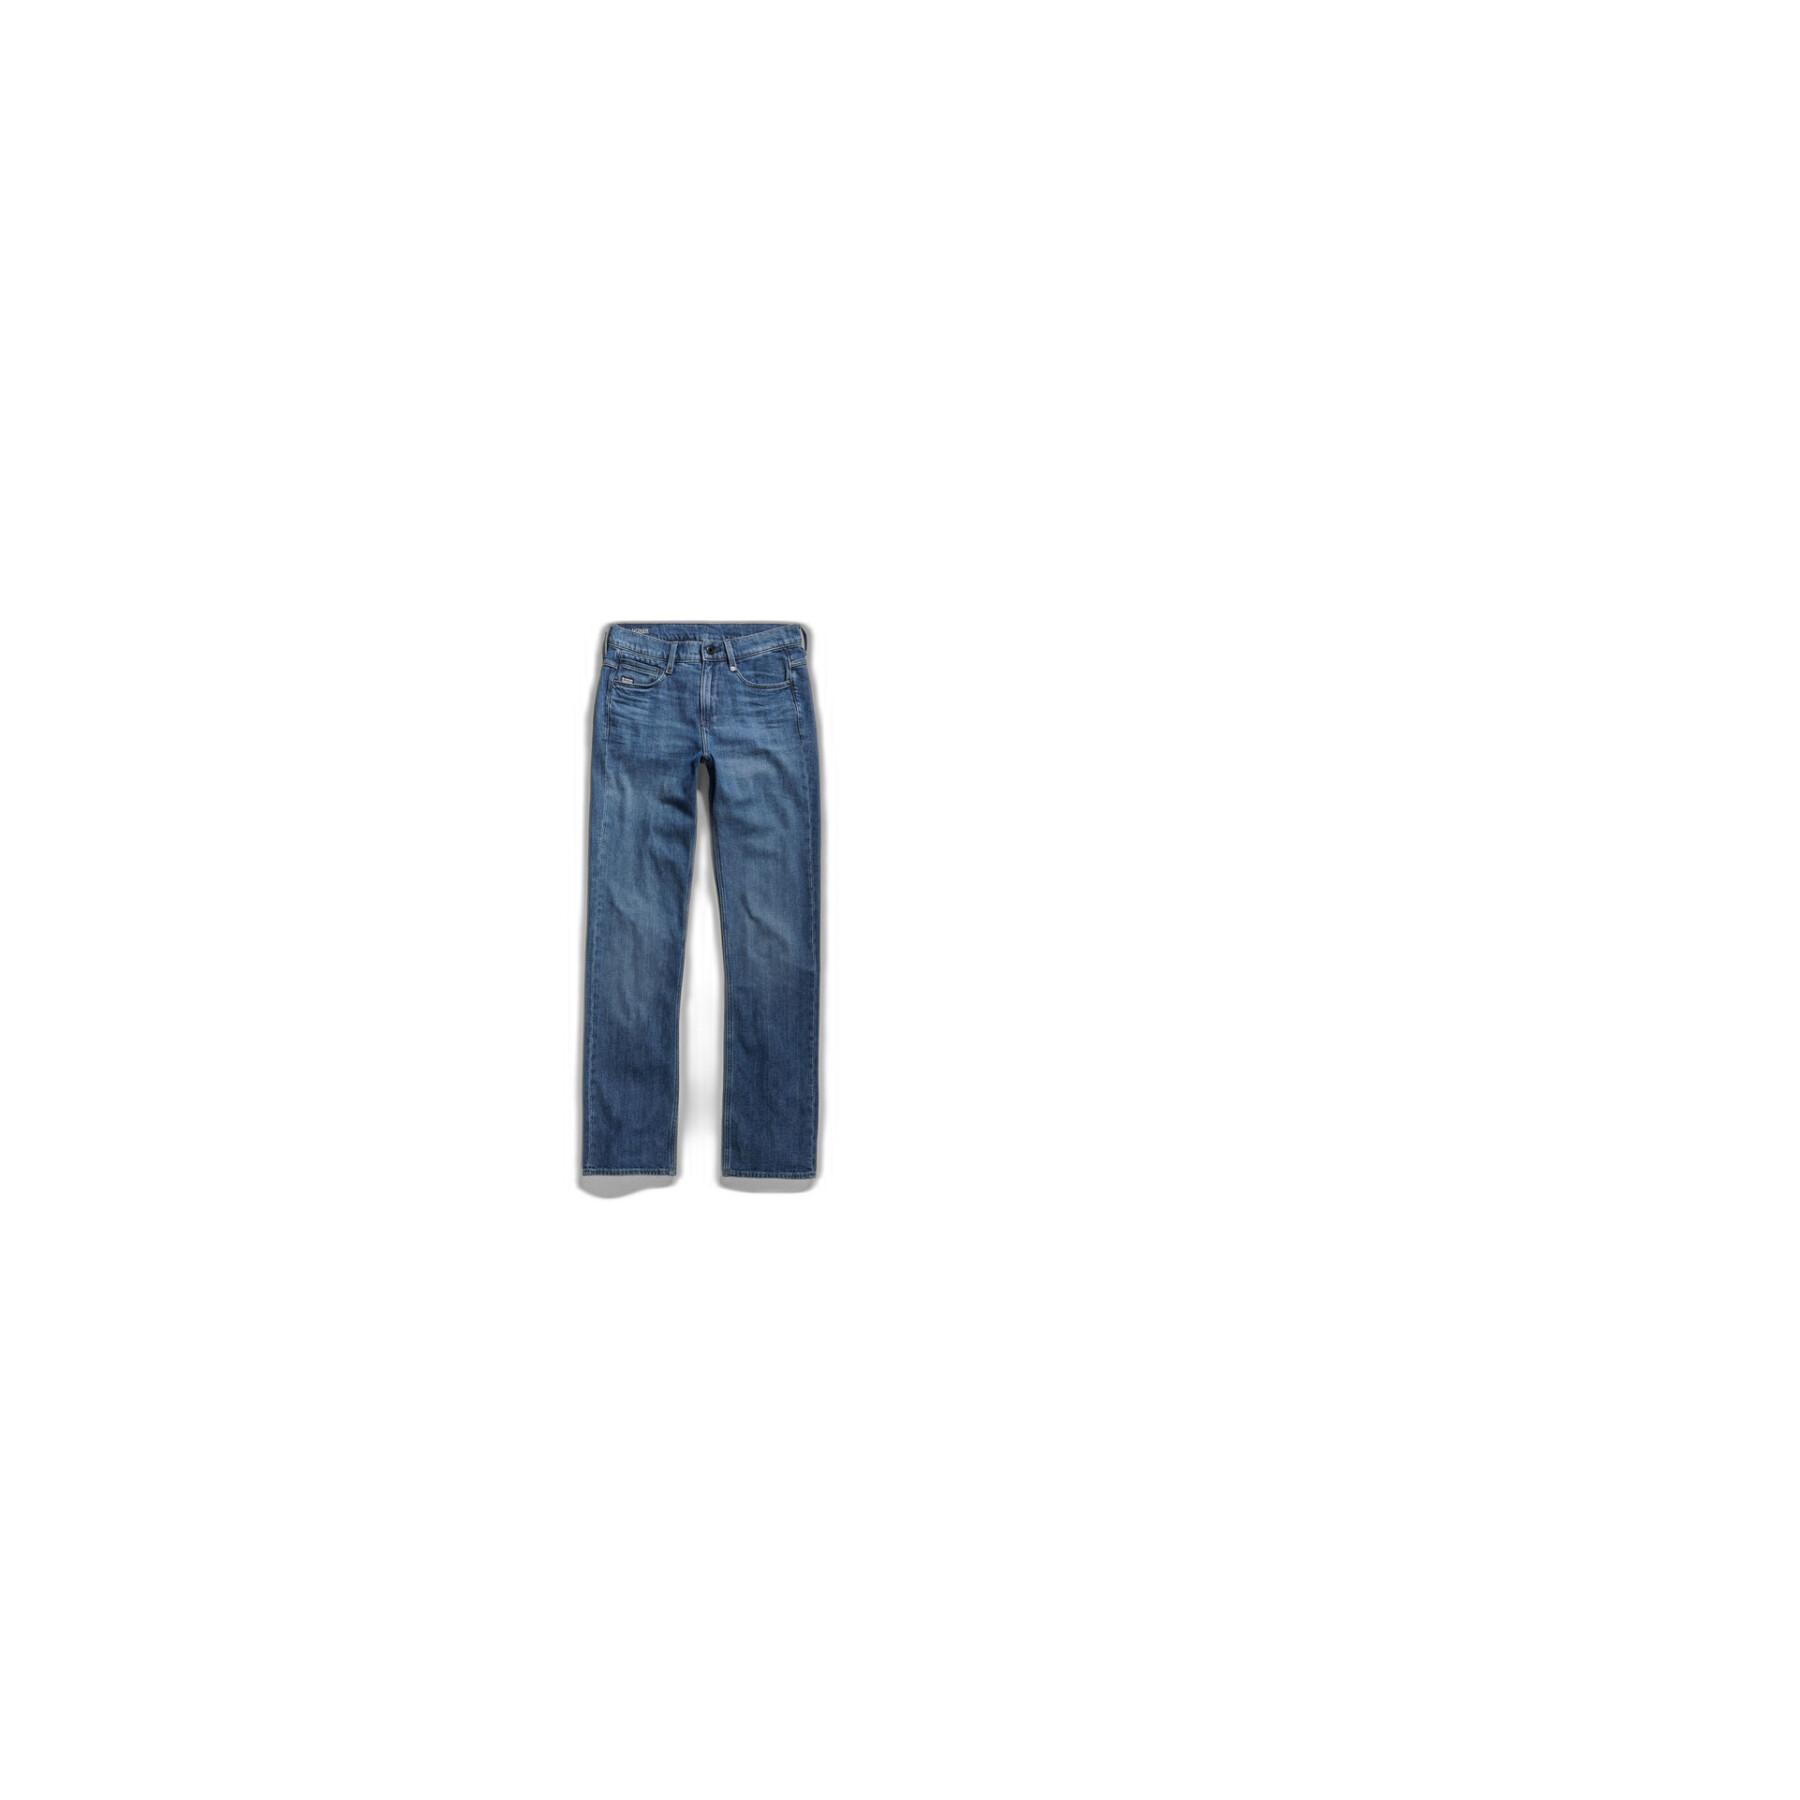 Jeans right woman G-Star Noxer